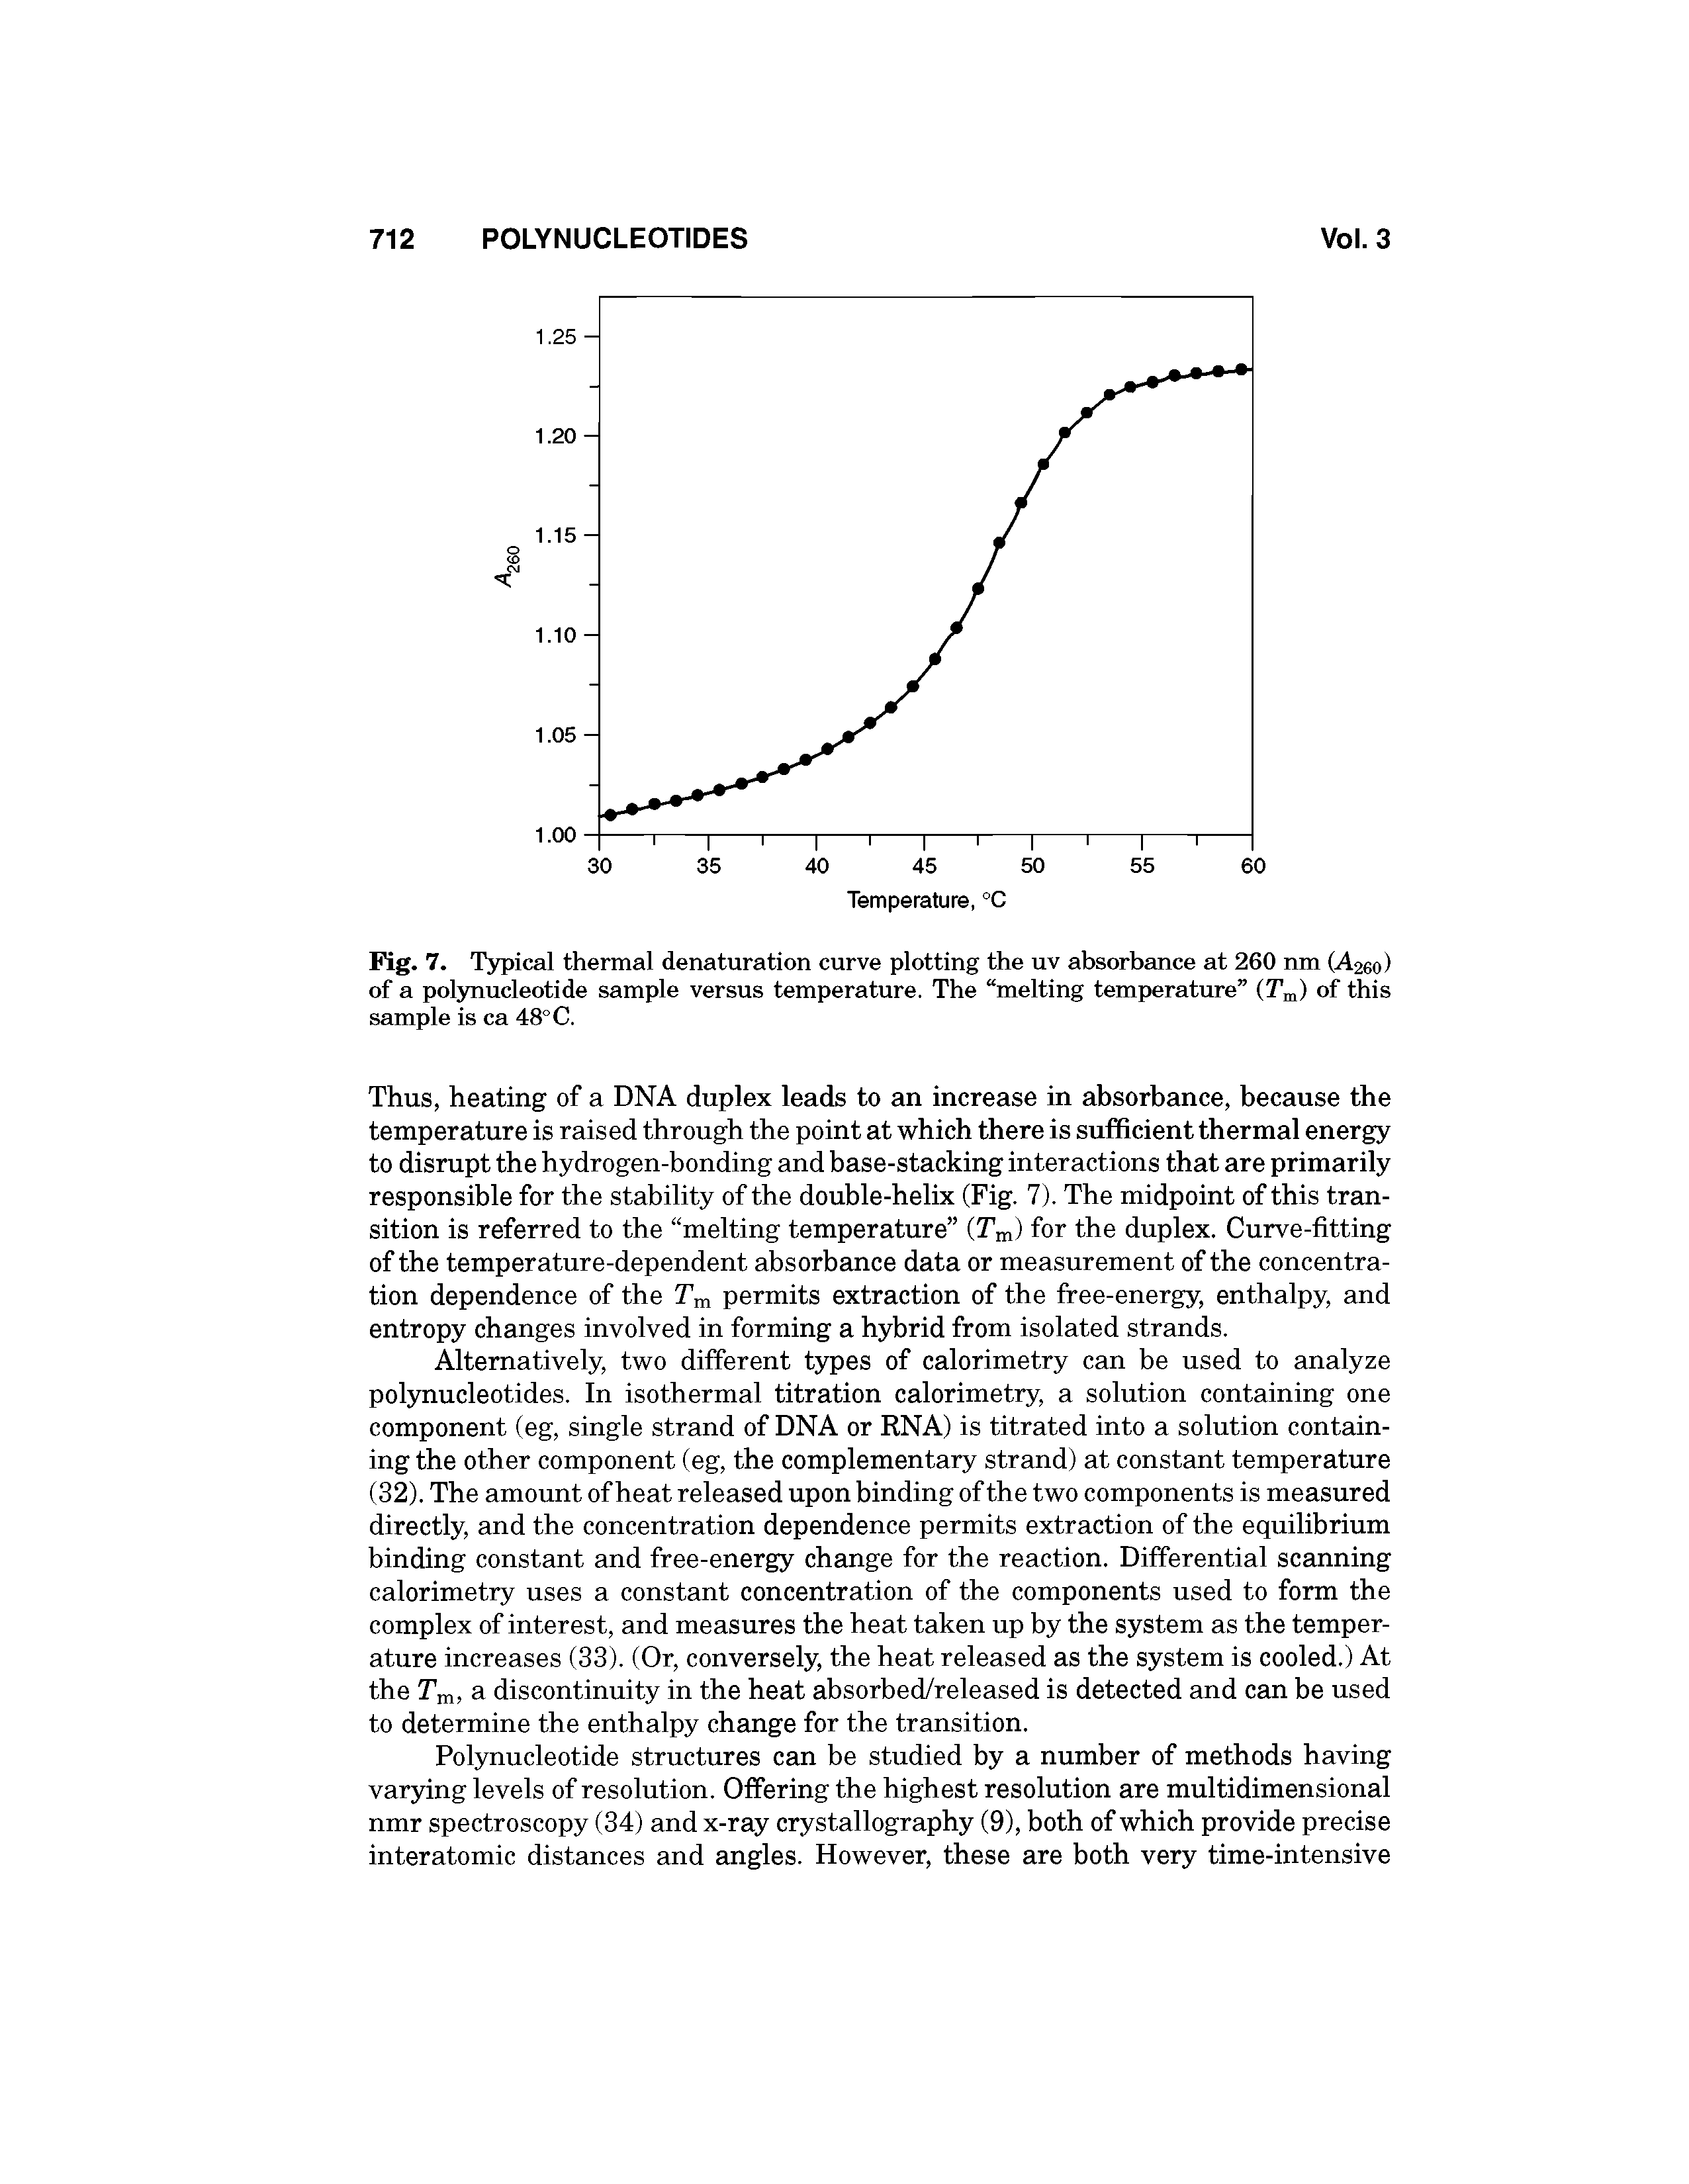 Fig. 7. Typical thermal denaturation curve plotting the uv absorbance at 260 nm (A260) of a polynucleotide sample versus temperature. The melting temperature (Tm) of this sample is ca 48° C.